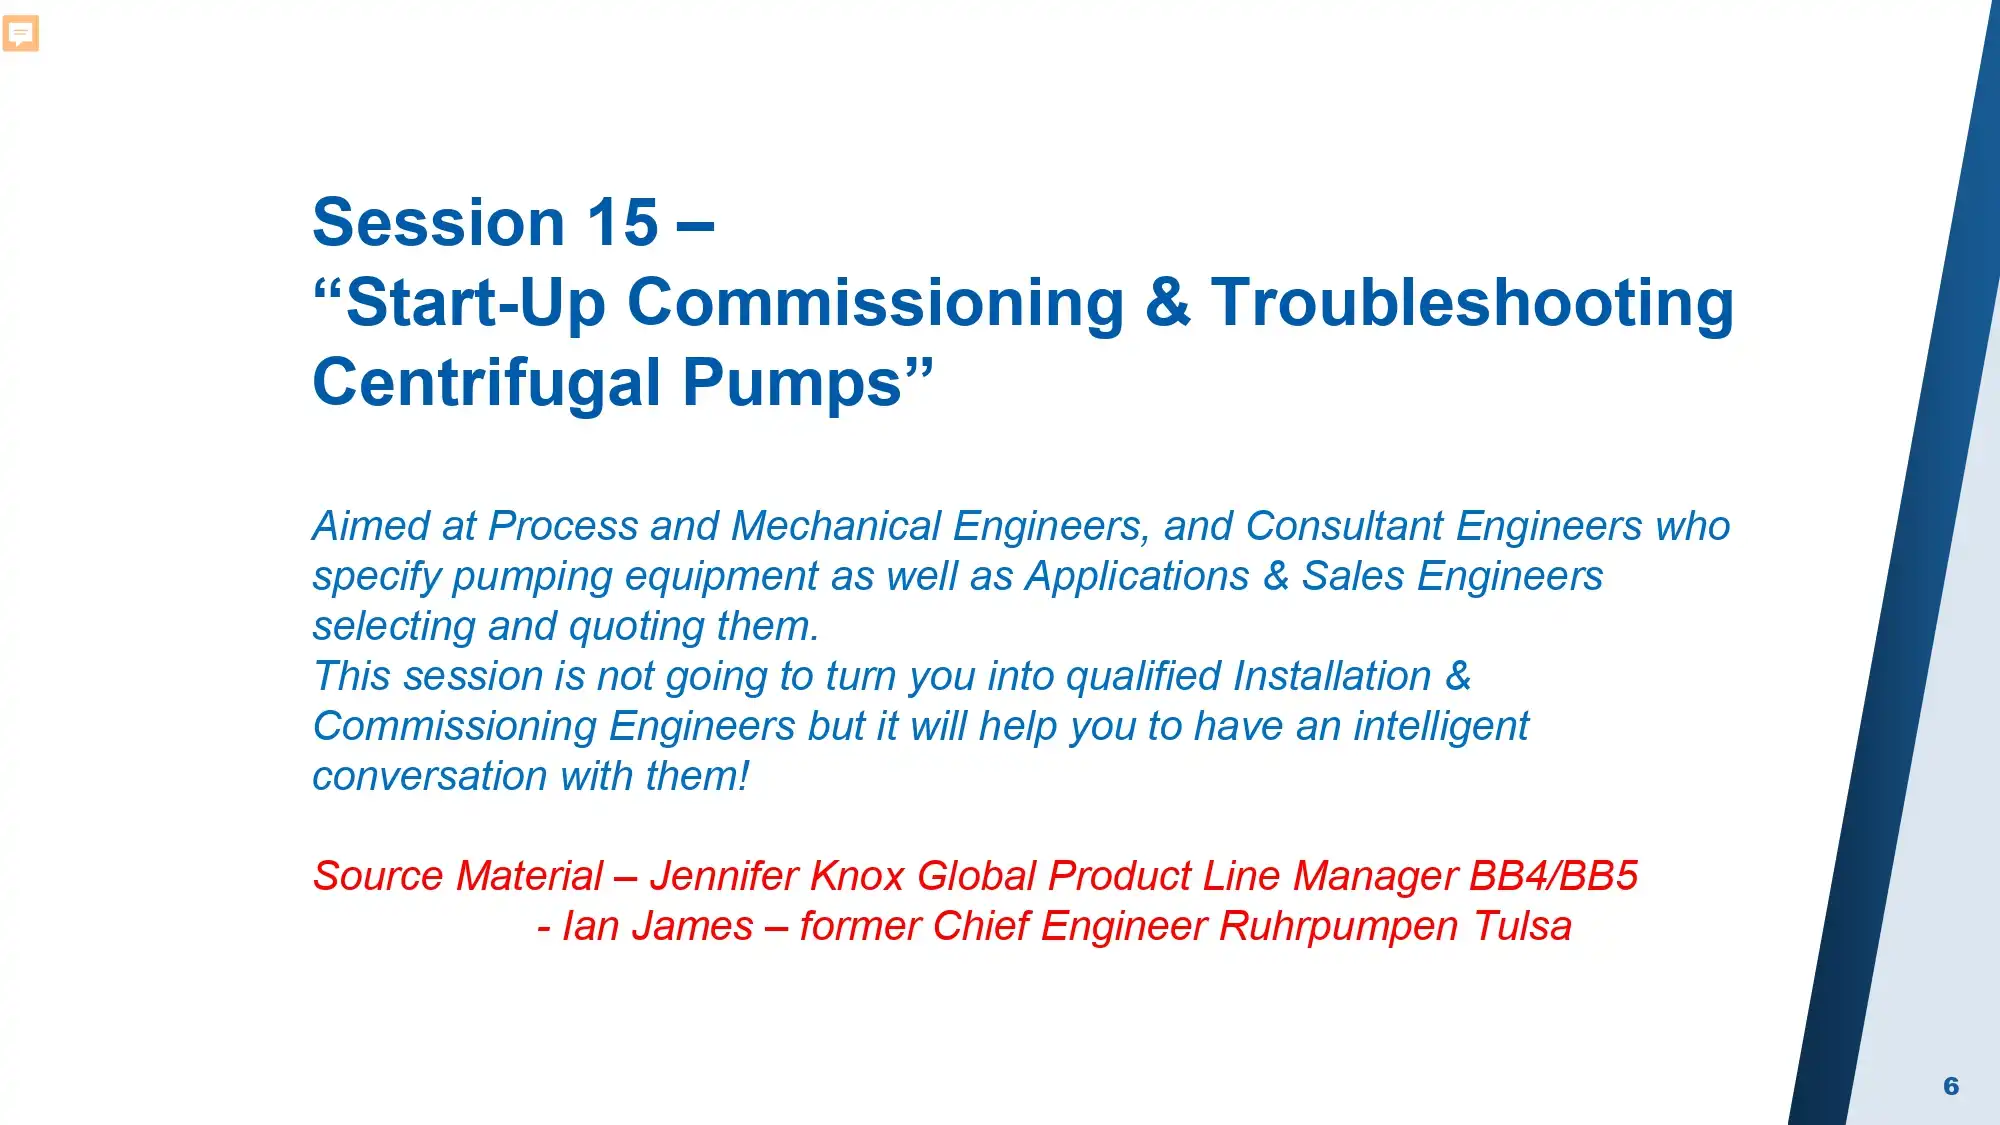 Session 15 – “Start-Up Commissioning & Troubleshooting Centrifugal Pumps